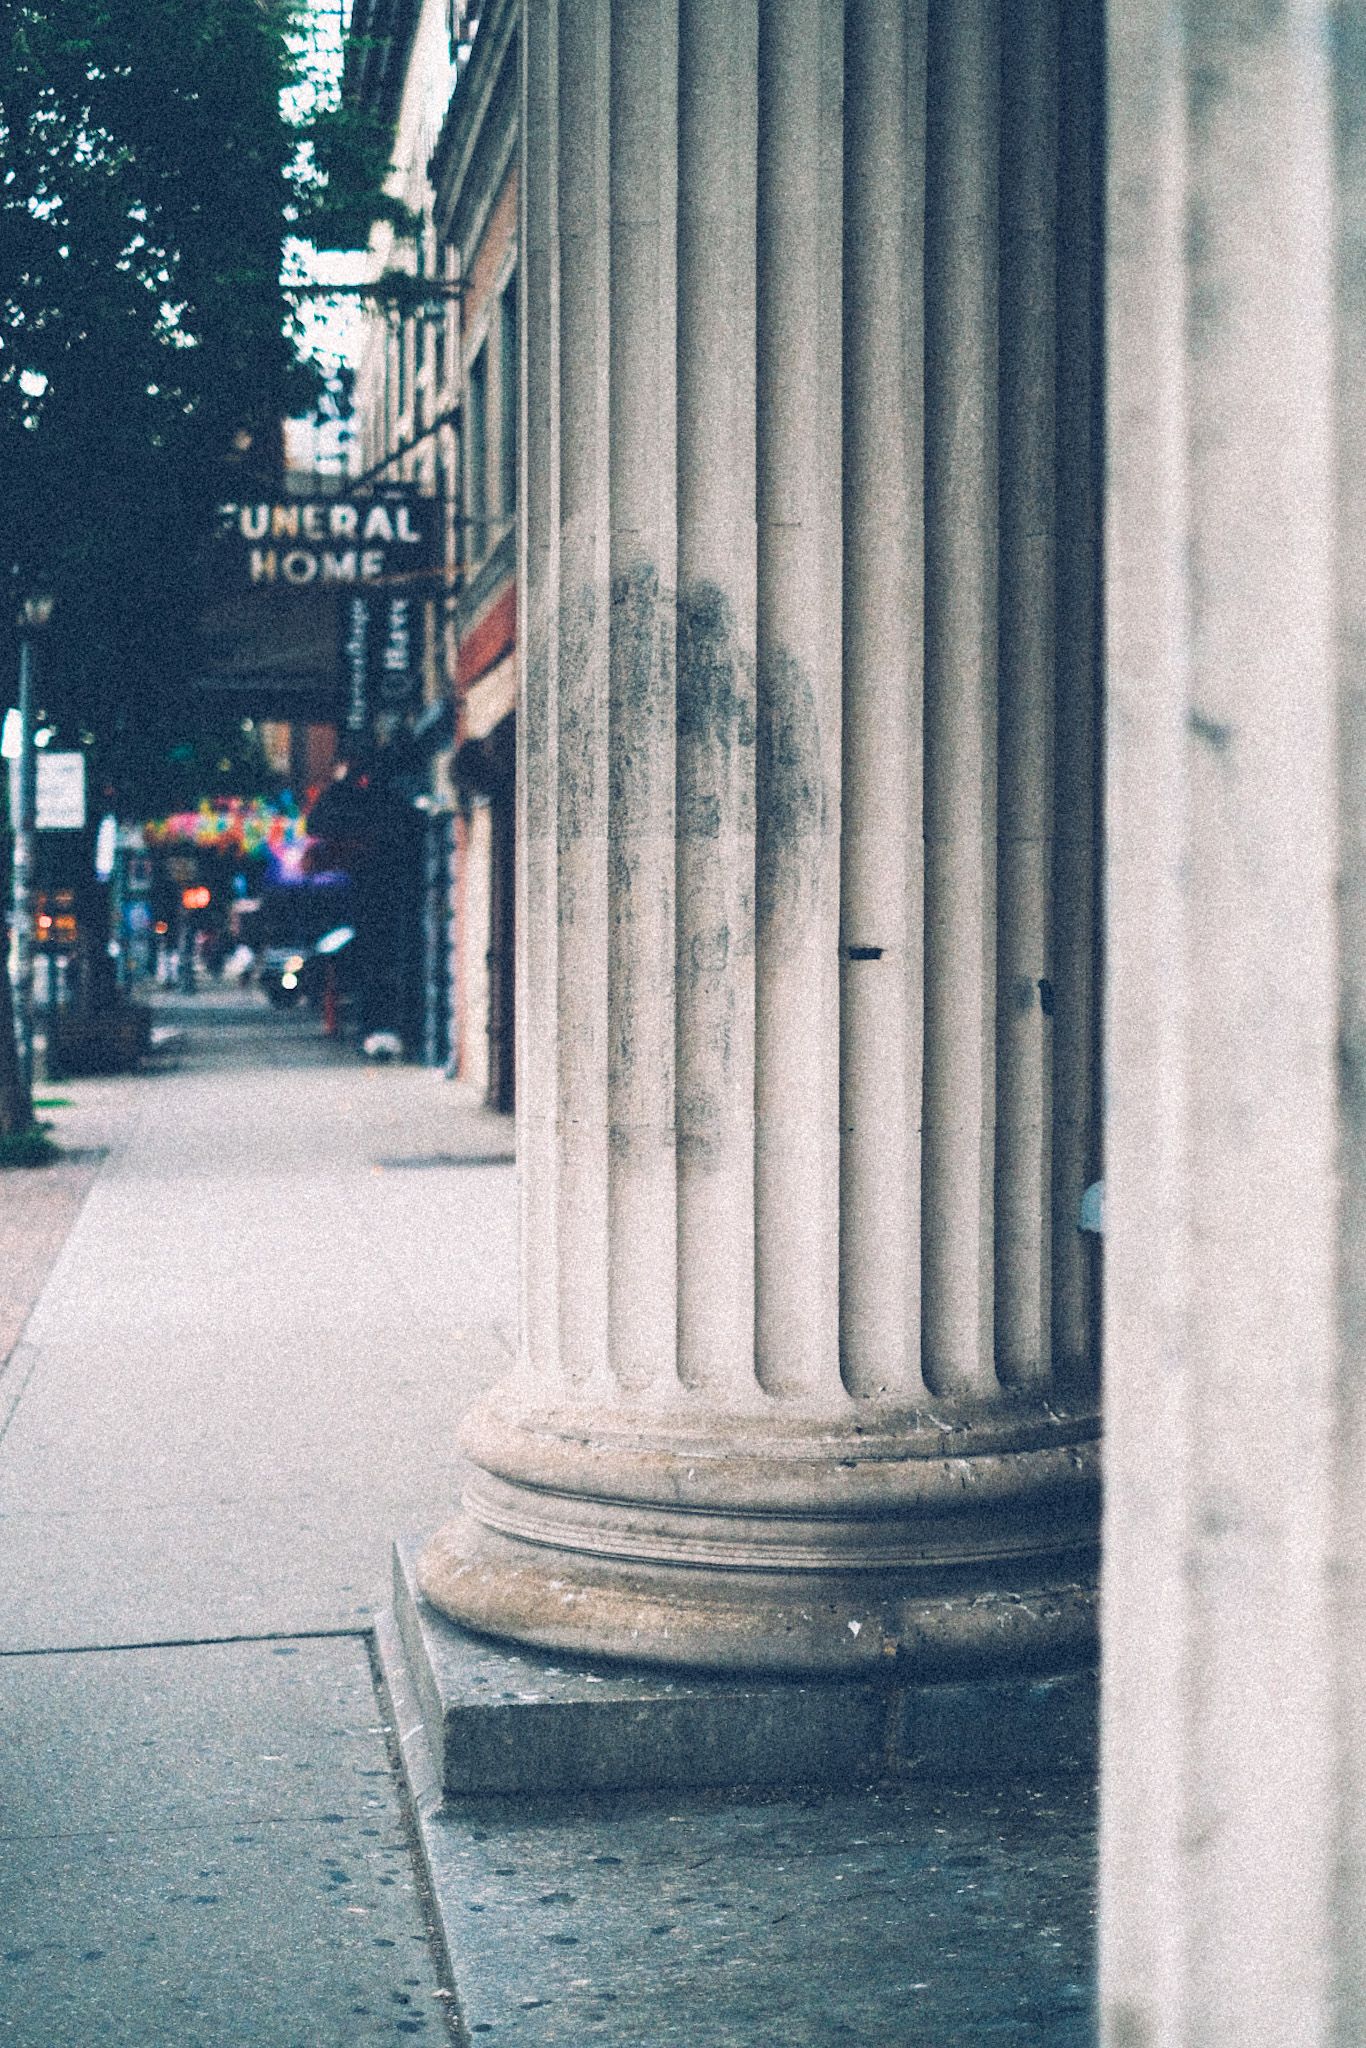 Dirty white pillars on a city street take up the right half of the frame, while in the distance the words “funeral home” line a sign.